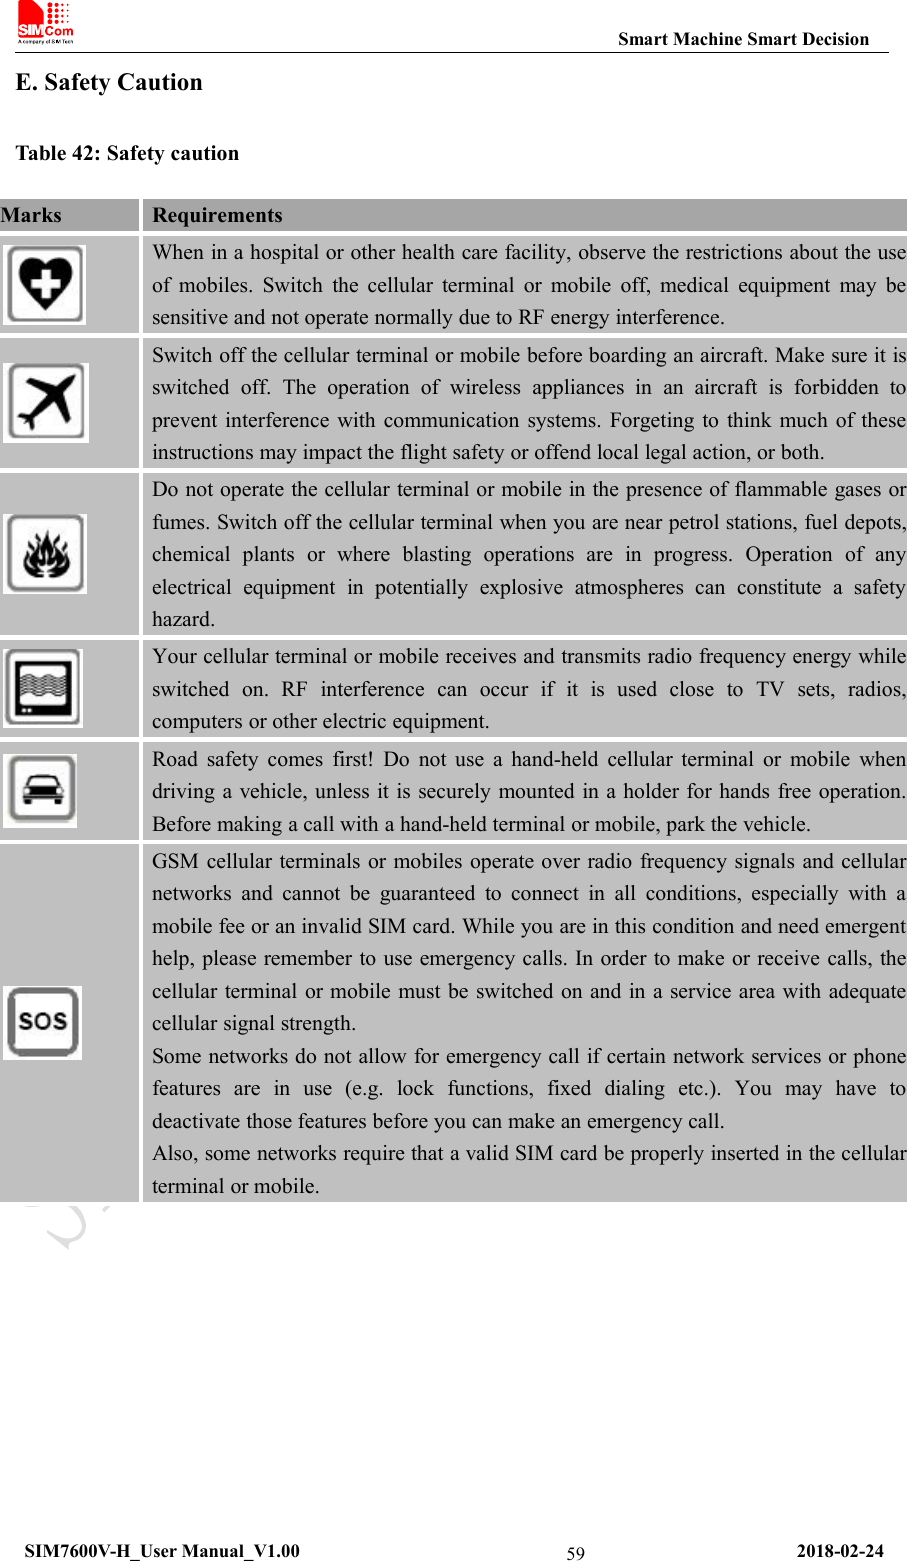 Smart Machine Smart DecisionSIM7600V-H_User Manual_V1.00 2018-02-2459E. Safety CautionTable 42: Safety cautionMarksRequirementsWhen in a hospital or other health care facility, observe the restrictions about the useof mobiles. Switch the cellular terminal or mobile off, medical equipment may besensitive and not operate normally due to RF energy interference.Switch off the cellular terminal or mobile before boarding an aircraft. Make sure it isswitched off. The operation of wireless appliances in an aircraft is forbidden toprevent interference with communication systems. Forgeting to think much of theseinstructions may impact the flight safety or offend local legal action, or both.Do not operate the cellular terminal or mobile in the presence of flammable gases orfumes. Switch off the cellular terminal when you are near petrol stations, fuel depots,chemical plants or where blasting operations are in progress. Operation of anyelectrical equipment in potentially explosive atmospheres can constitute a safetyhazard.Your cellular terminal or mobile receives and transmits radio frequency energy whileswitched on. RF interference can occur if it is used close to TV sets, radios,computers or other electric equipment.Road safety comes first! Do not use a hand-held cellular terminal or mobile whendriving a vehicle, unless it is securely mounted in a holder for hands free operation.Before making a call with a hand-held terminal or mobile, park the vehicle.GSM cellular terminals or mobiles operate over radio frequency signals and cellularnetworks and cannot be guaranteed to connect in all conditions, especially with amobile fee or an invalid SIM card. While you are in this condition and need emergenthelp, please remember to use emergency calls. In order to make or receive calls, thecellular terminal or mobile must be switched on and in a service area with adequatecellular signal strength.Some networks do not allow for emergency call if certain network services or phonefeatures are in use (e.g. lock functions, fixed dialing etc.). You may have todeactivate those features before you can make an emergency call.Also, some networks require that a valid SIM card be properly inserted in the cellularterminal or mobile.